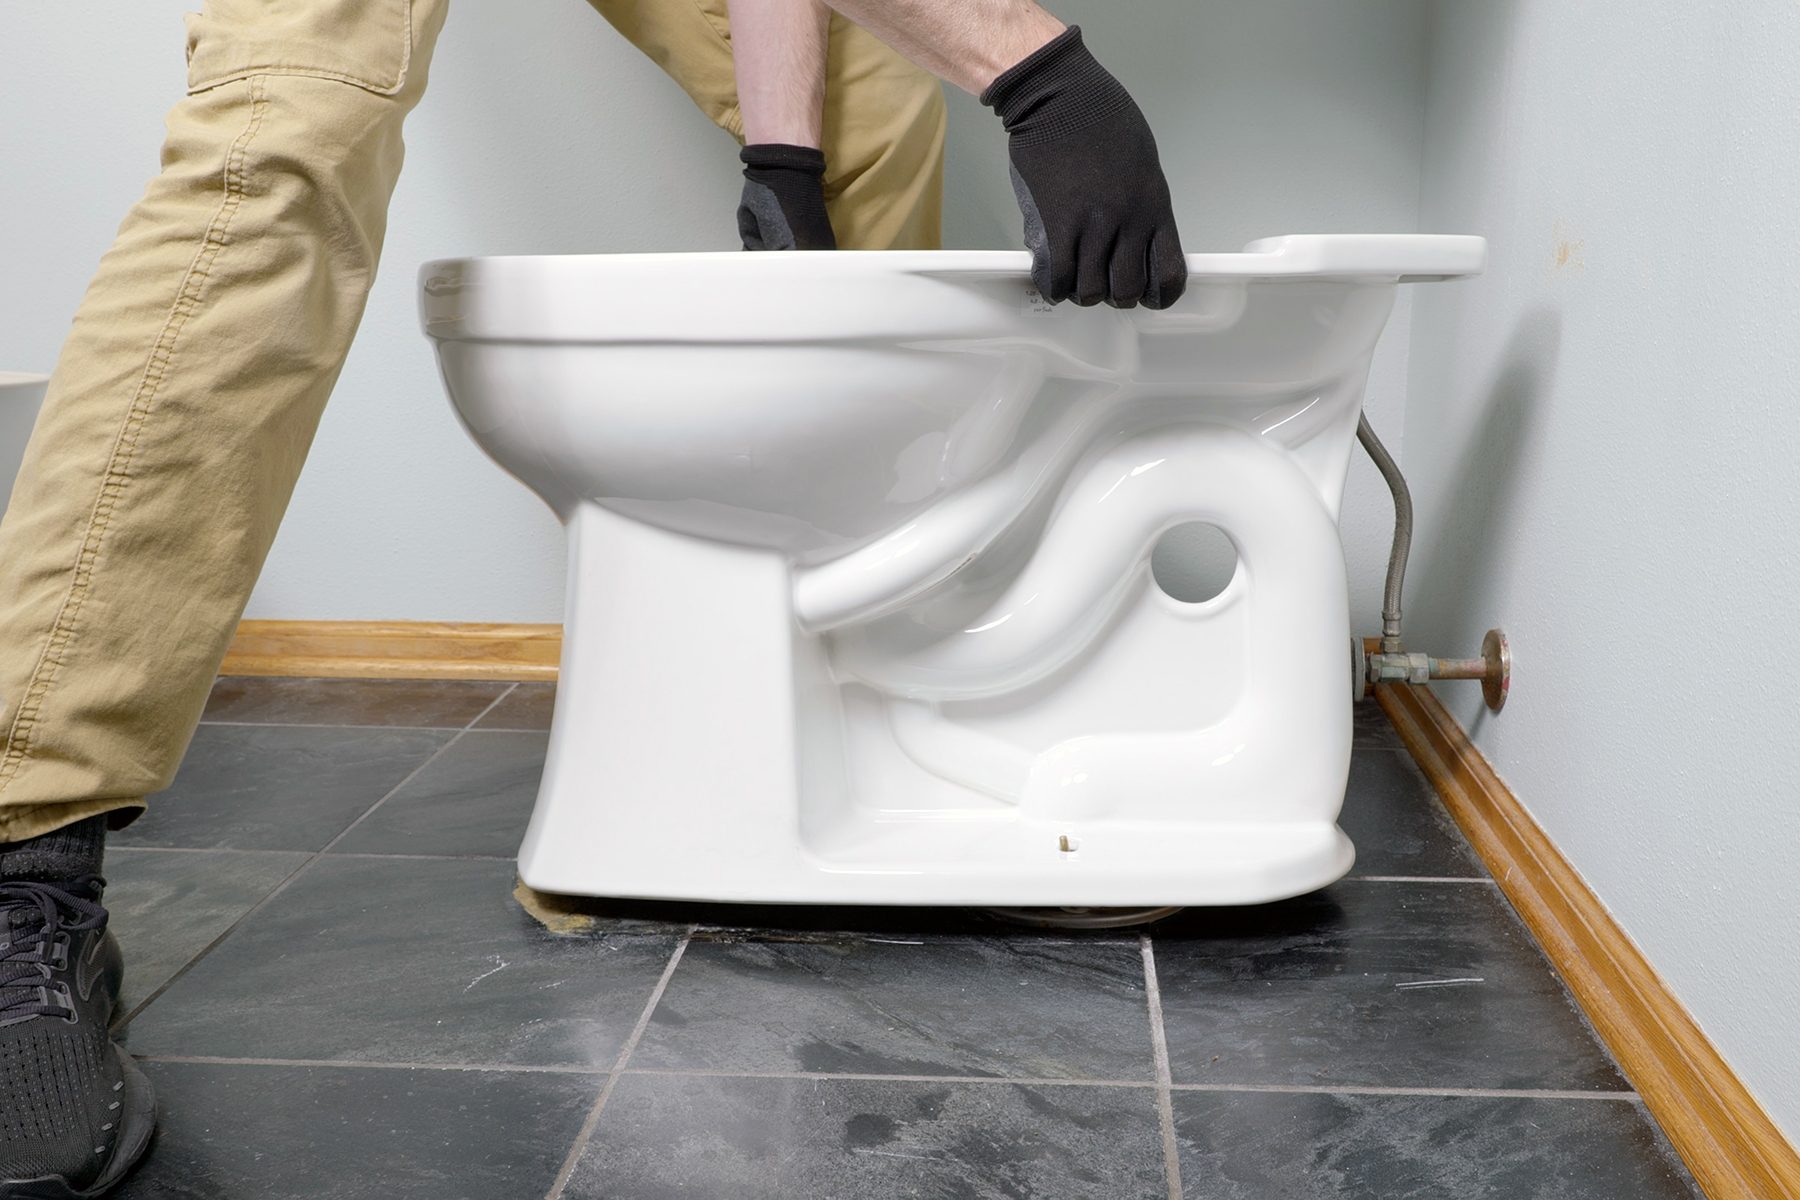 How To Replace a Toilet